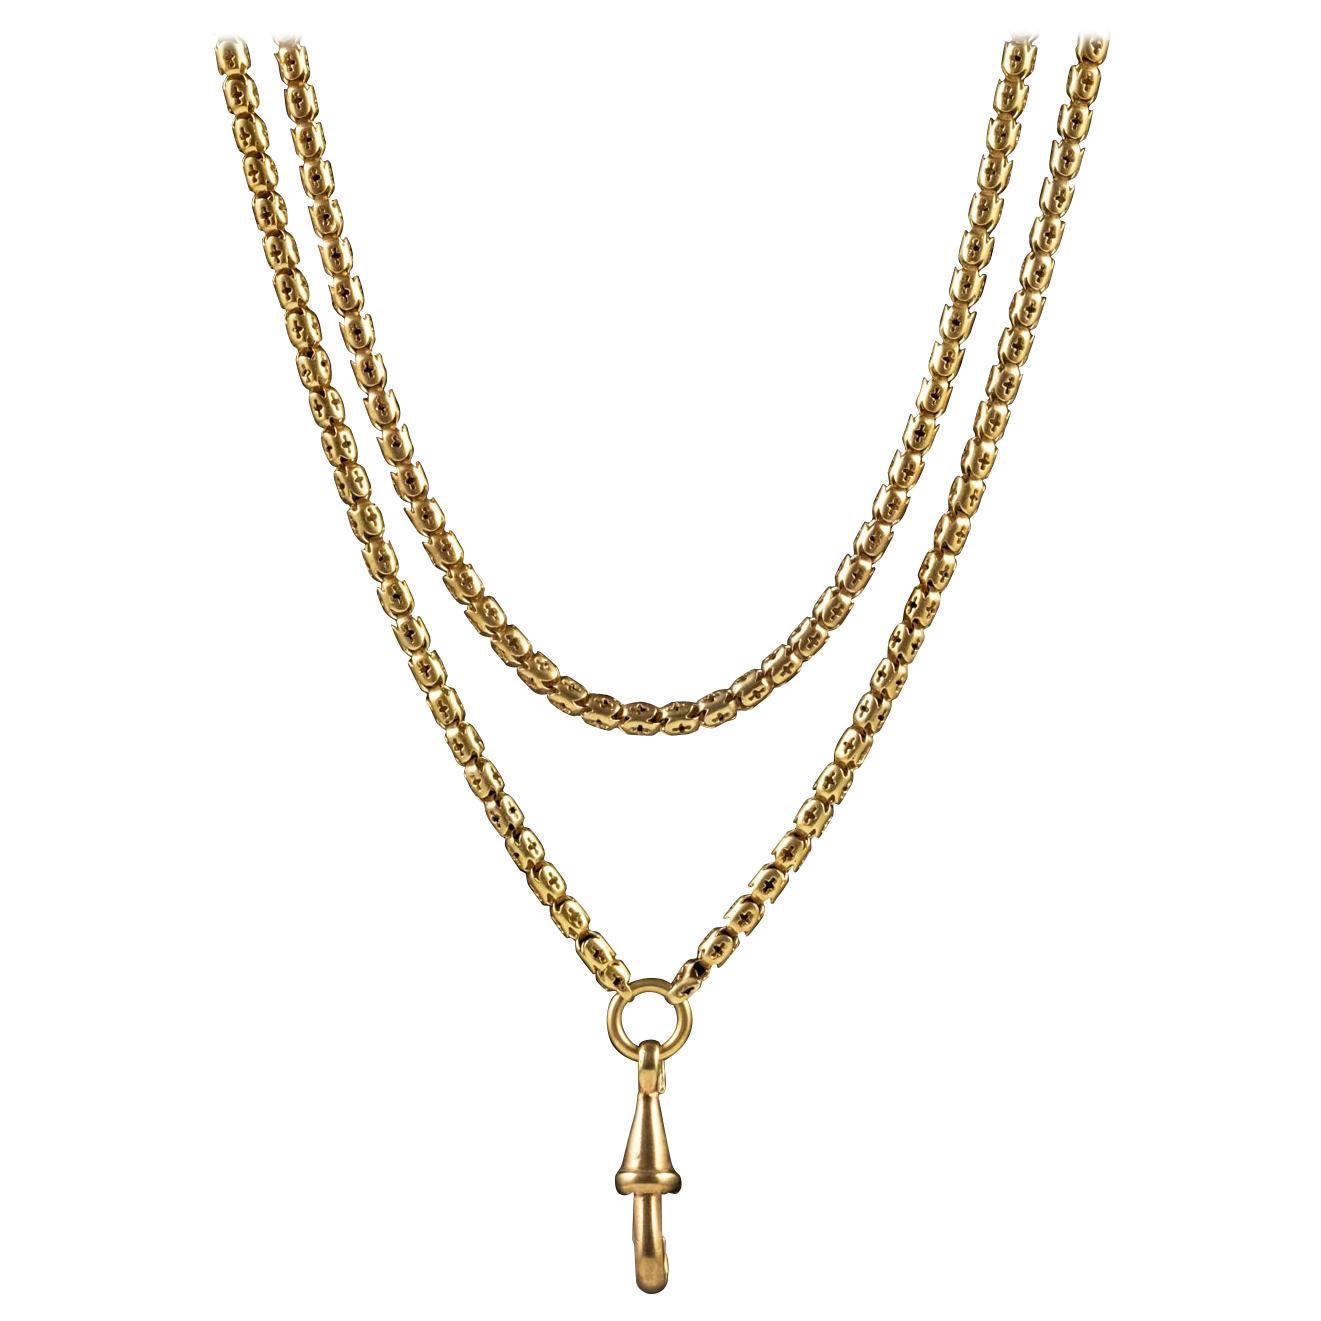 Antique Victorian Guard Chain 18 Carat Gold on Silver Link Necklace, circa 1880 For Sale